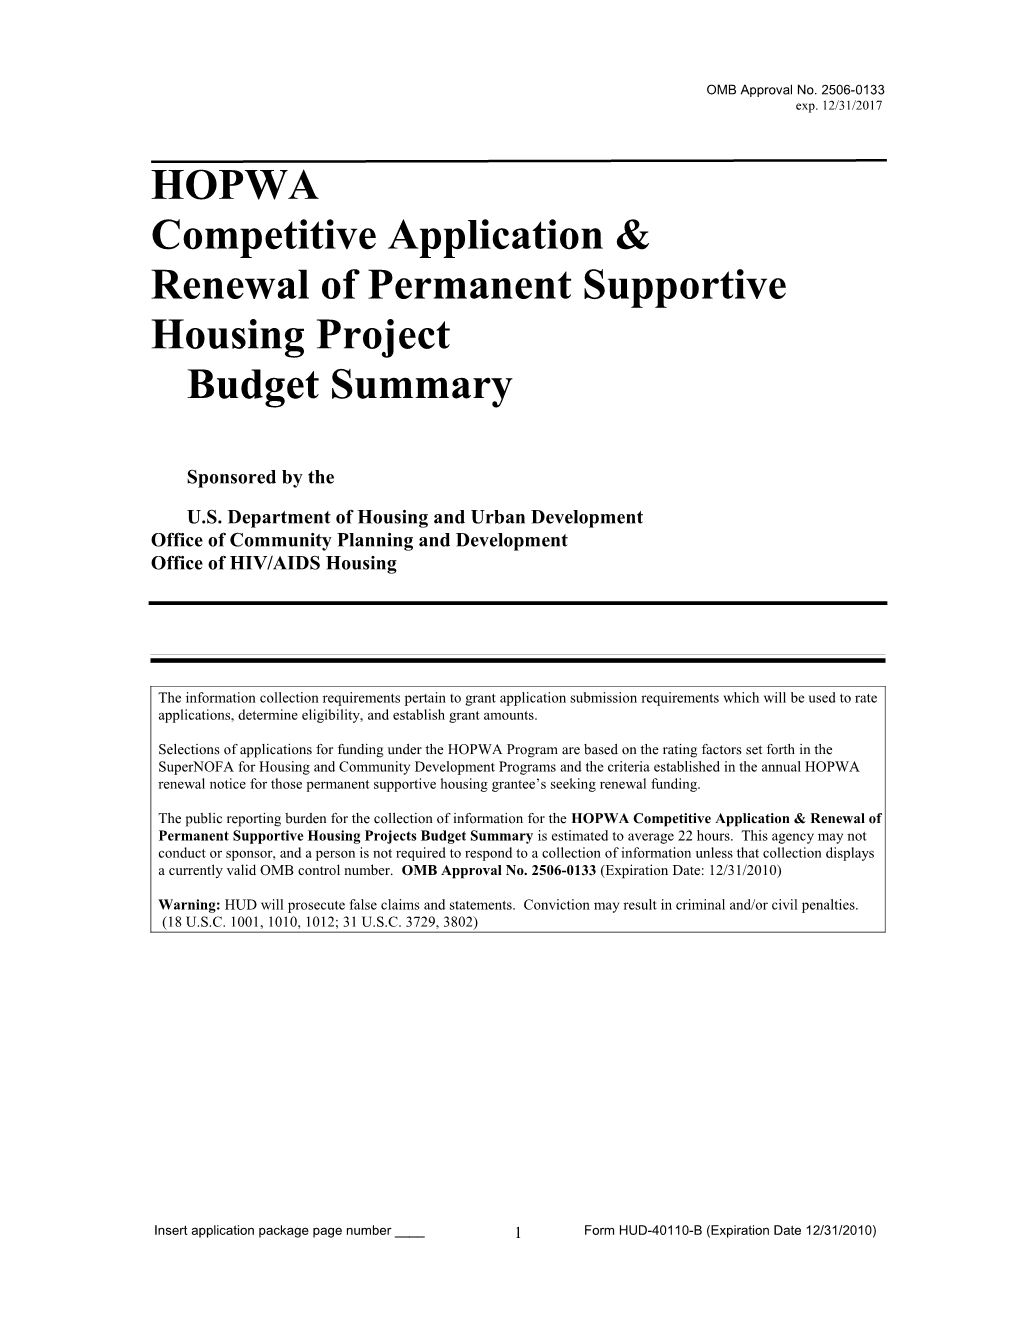 Renewal of Permanent Supportive Housing Project